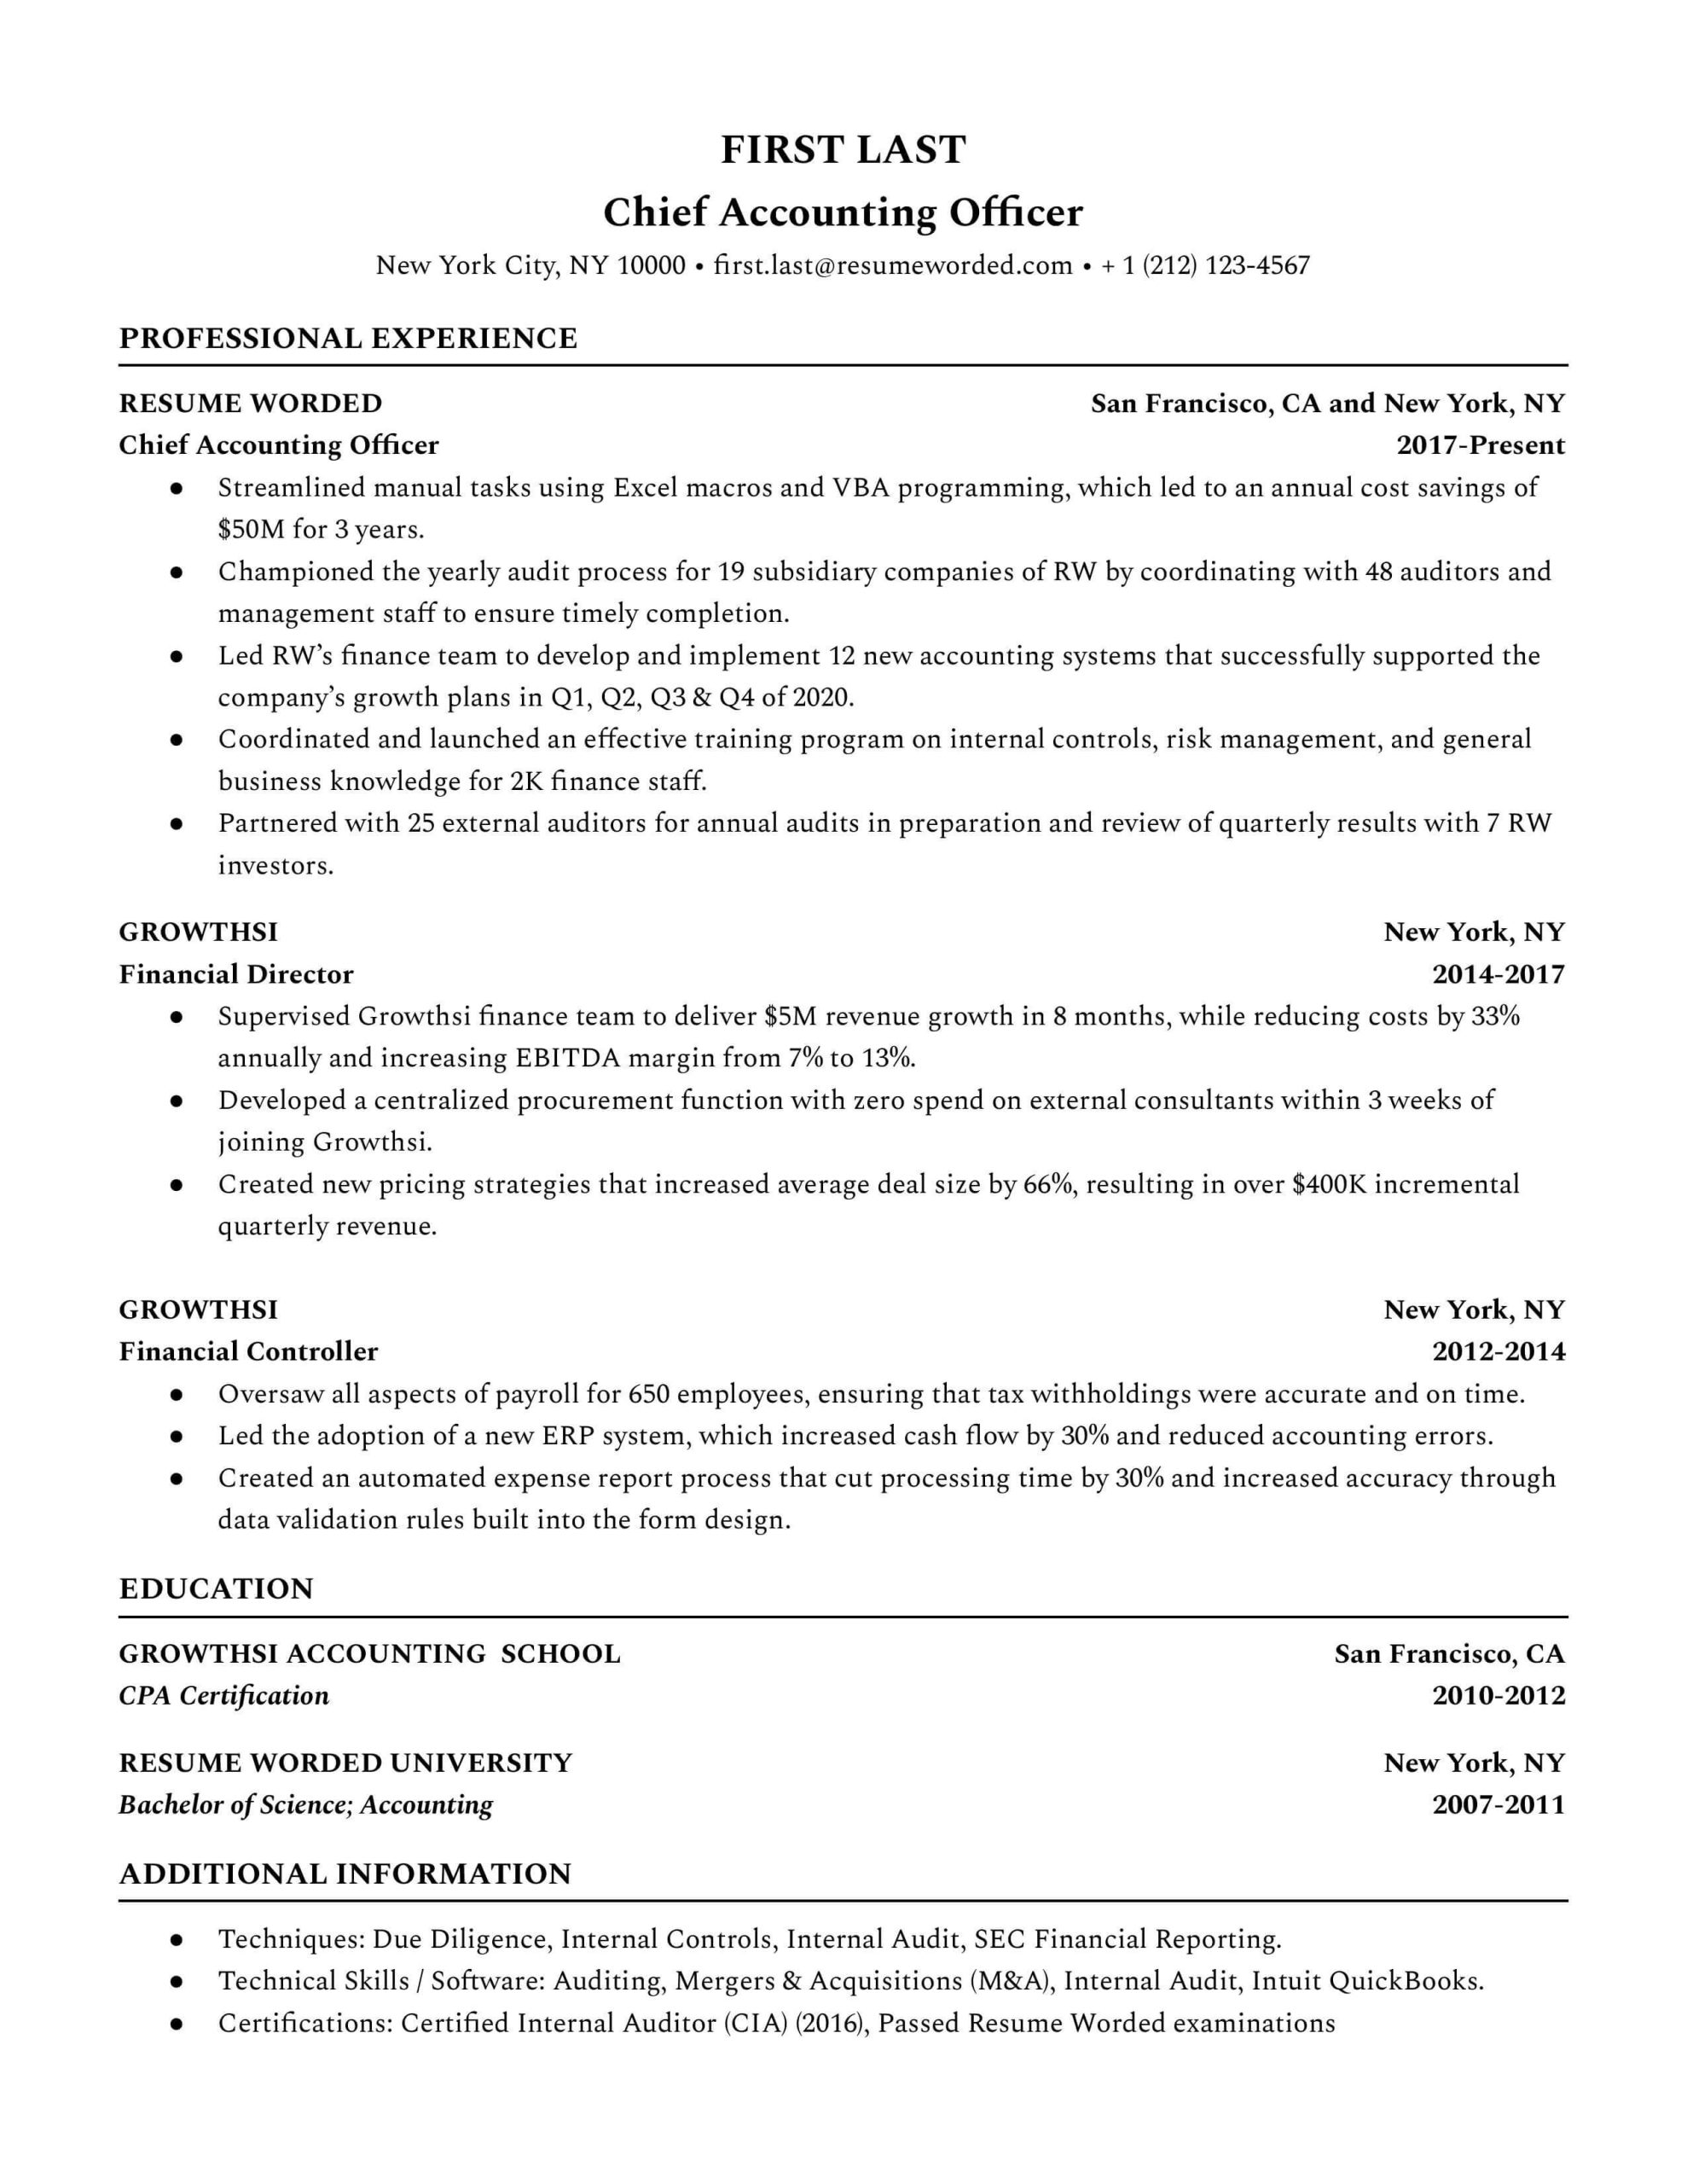 Entry Level Staff Accountant Resume Sample Entry Level Accountant Resume Example for 2022 Resume Worded